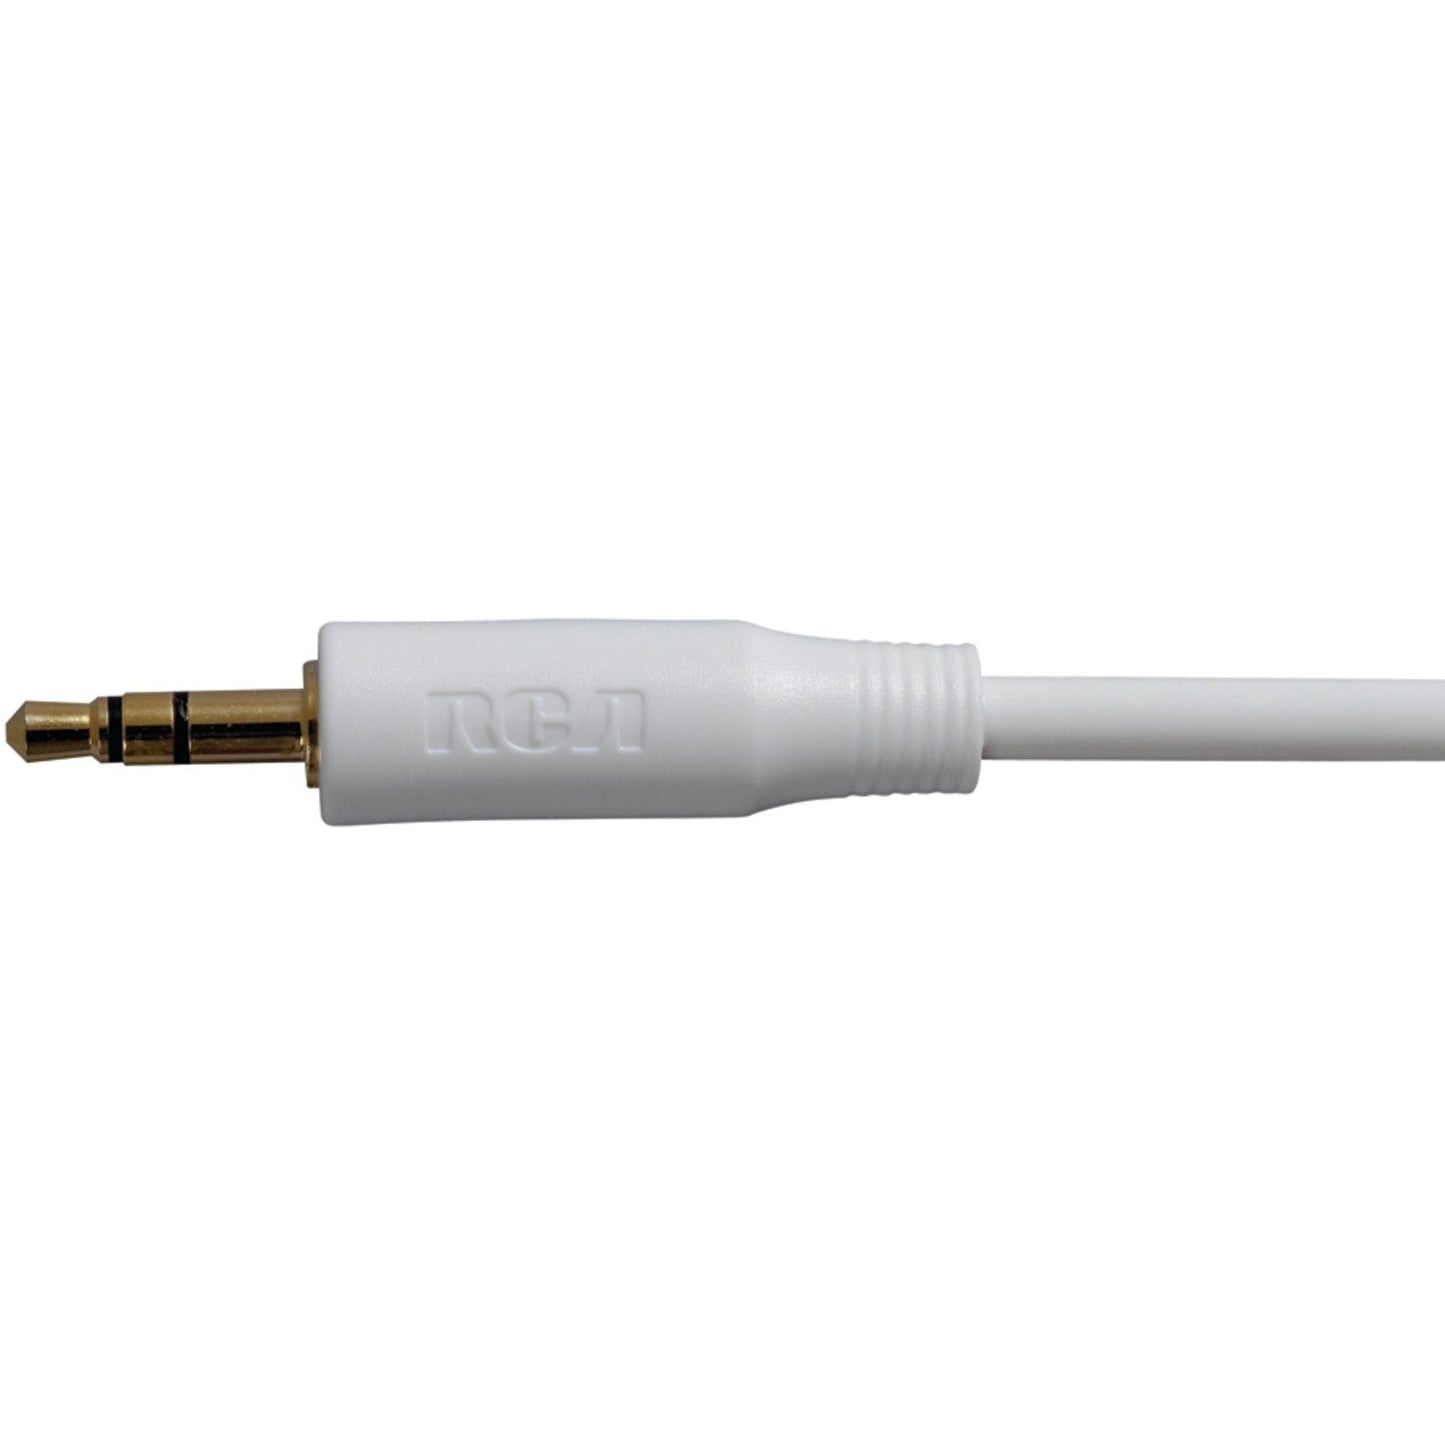 RCA AH748Z Premium 3.5mm Stereo Cable, 6ft